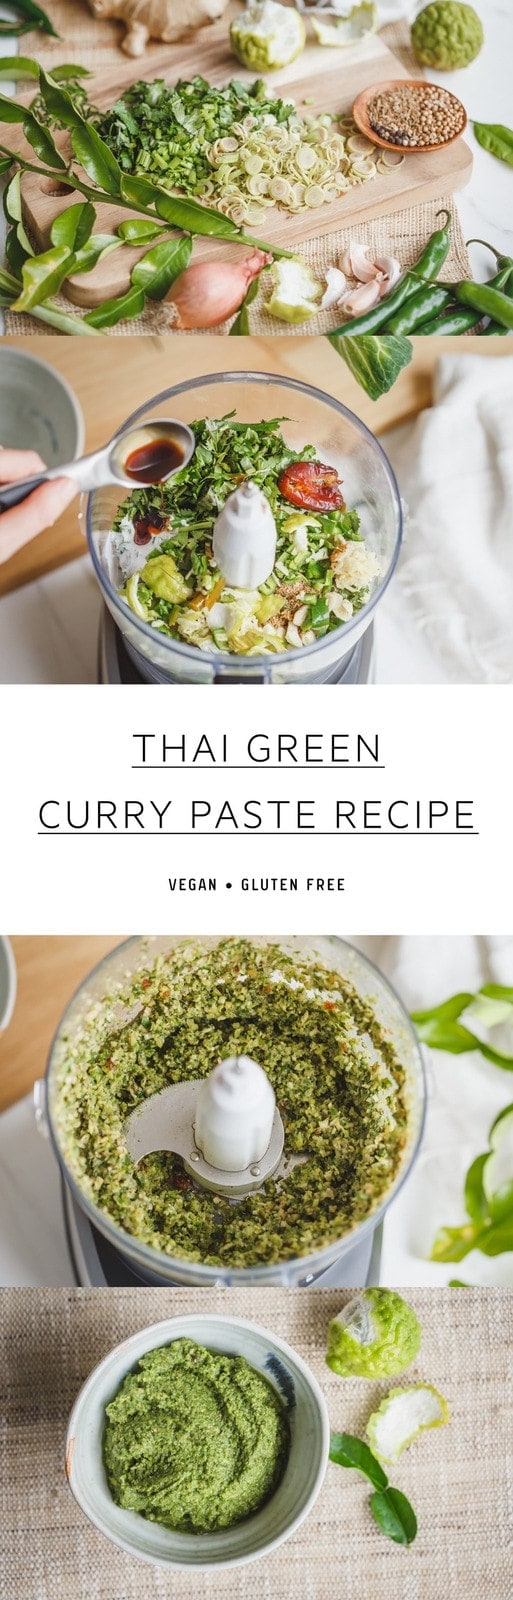 A super quick and easy, vegan Thai Green Curry Paste recipe made without shrimp paste, fish sauce, or the elbow grease needed with that mortar and pestle! Done in 10 minutes, you can freeze what you don’t use for an easy mid-week curry. #easycurrypaste #vegancurrypaste #greencurrypaste #greencurrypastevegan #greencurrypasteeasy #thaigreencurrypaste #homemadecurrypaste #currypaste #easycurry #quickdinner #currypasterecipe #vegetariancurry #vegancurry #currypastecoconutmilk #vegandinner #AscensionKitchen